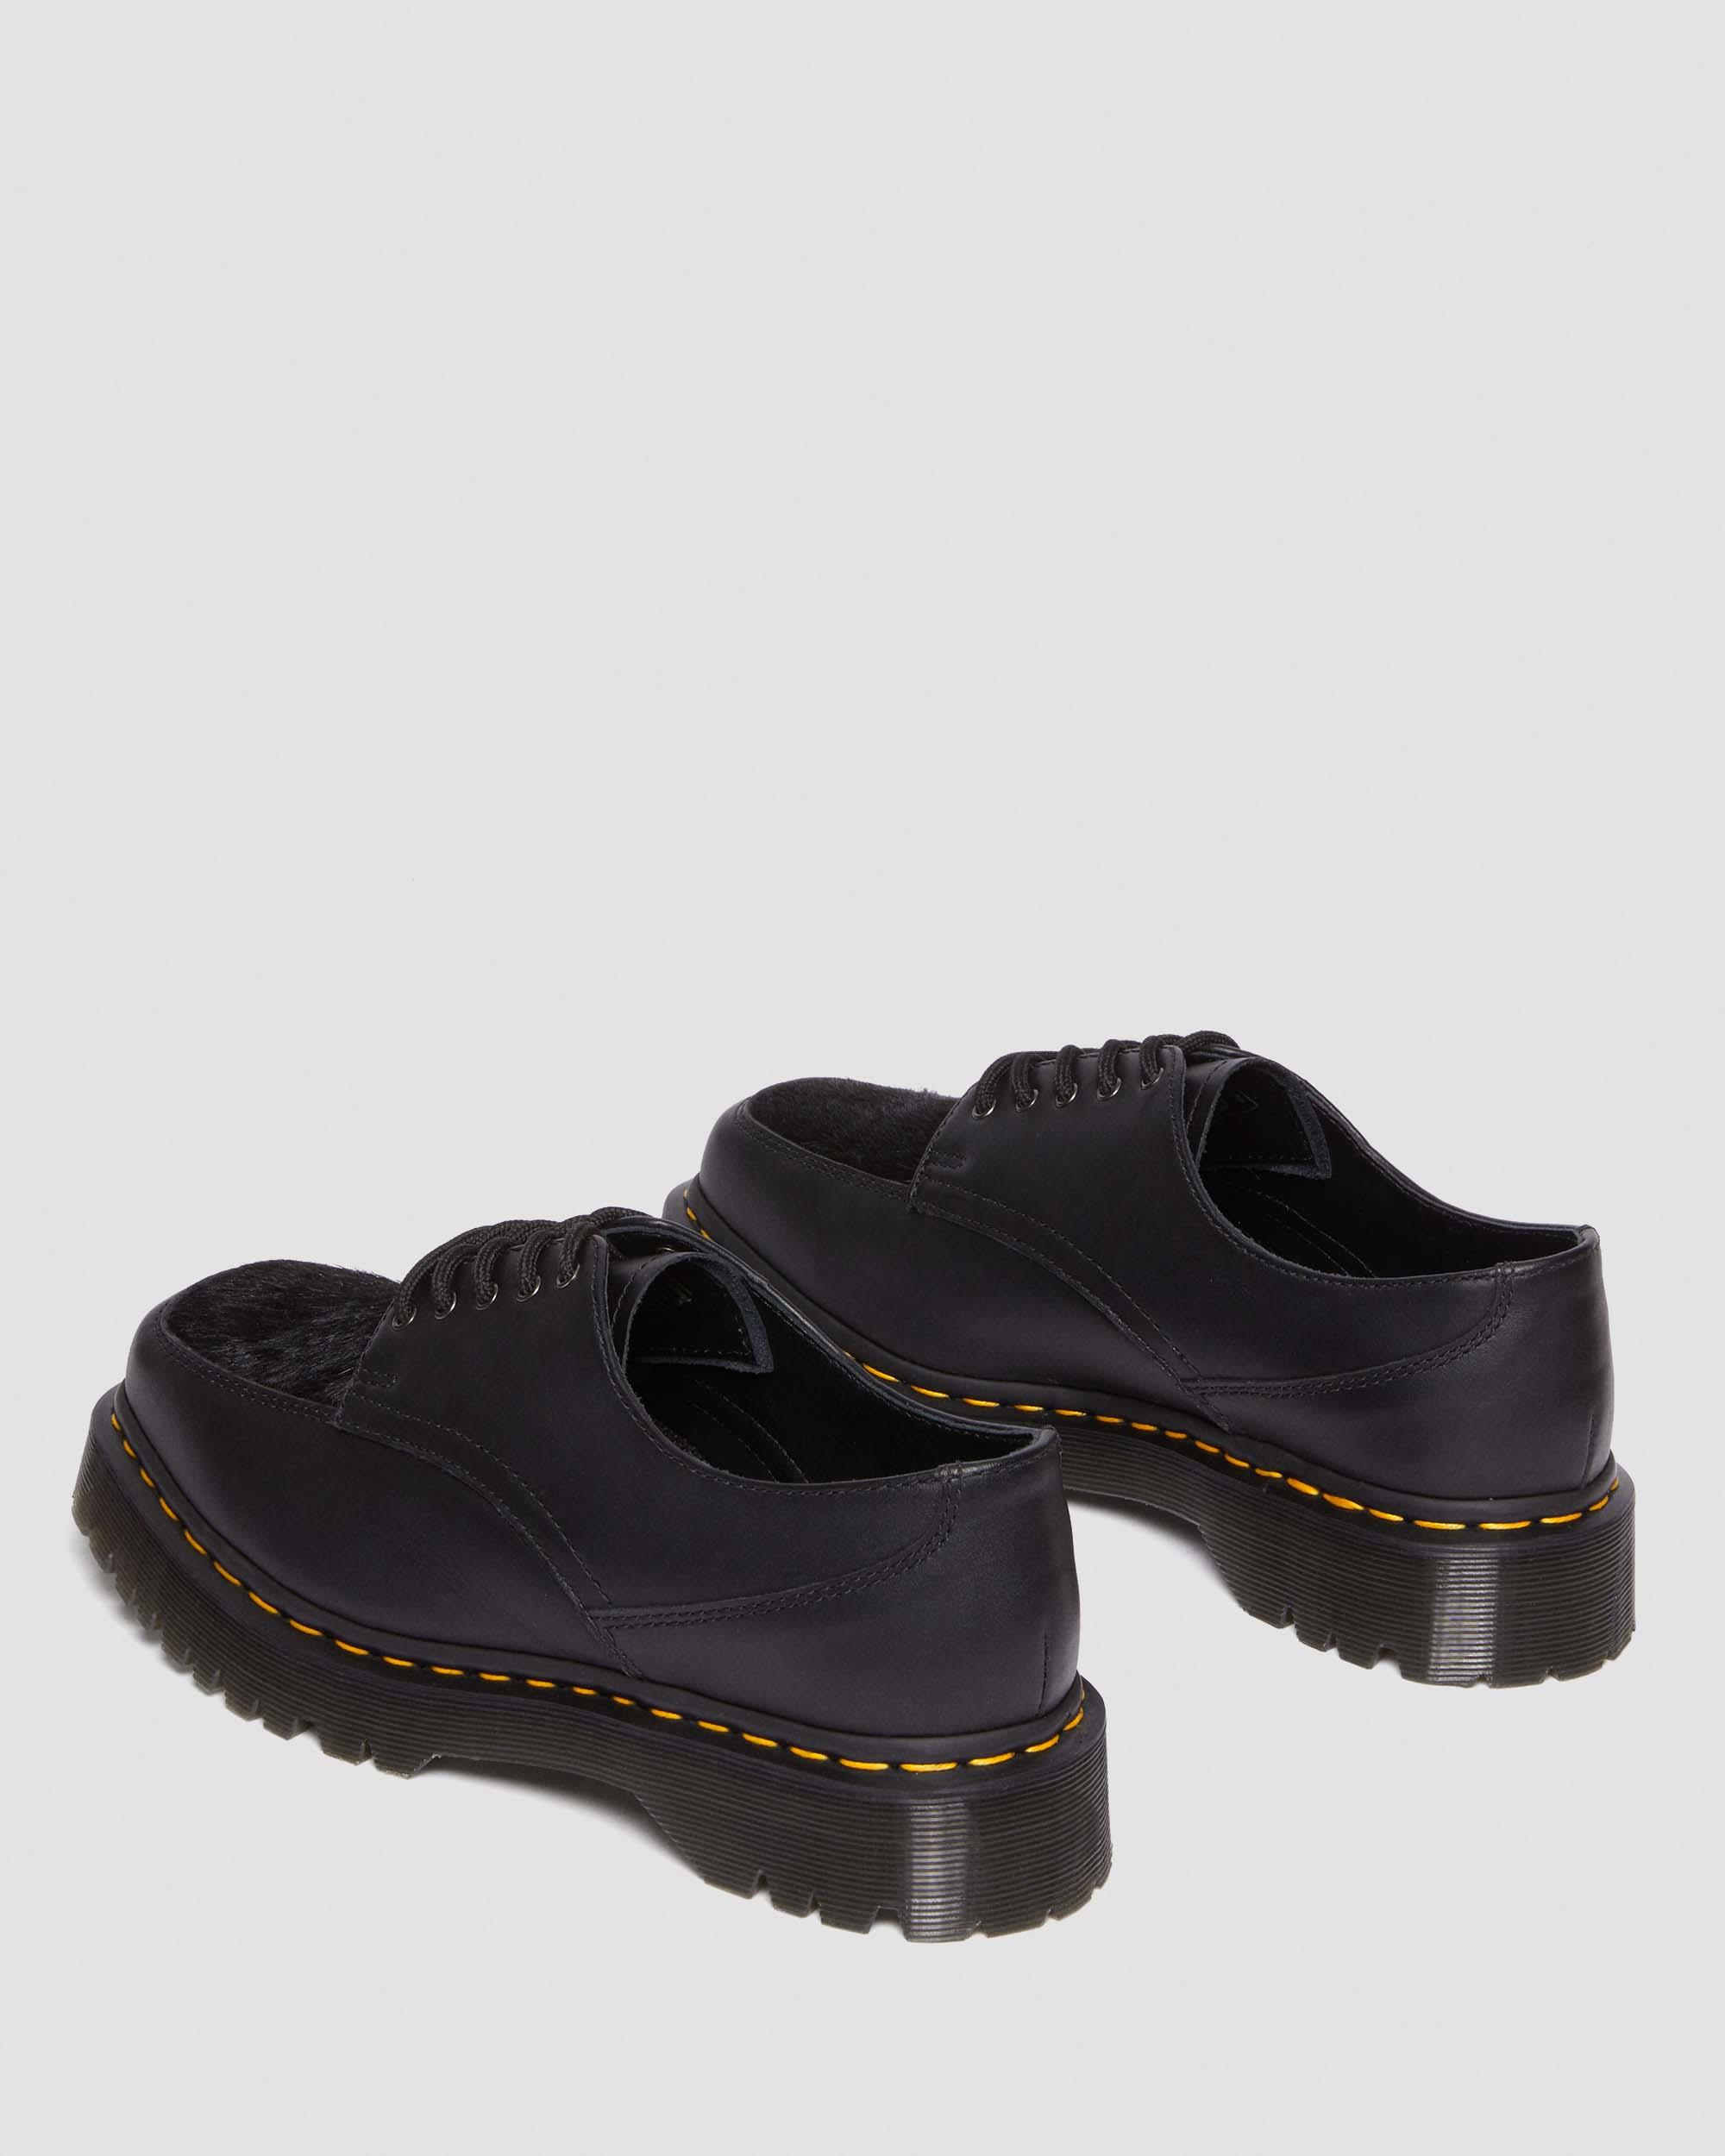 5-Eye Bex Square Toe Hair-On & Leather Shoes in Black | Dr. Martens